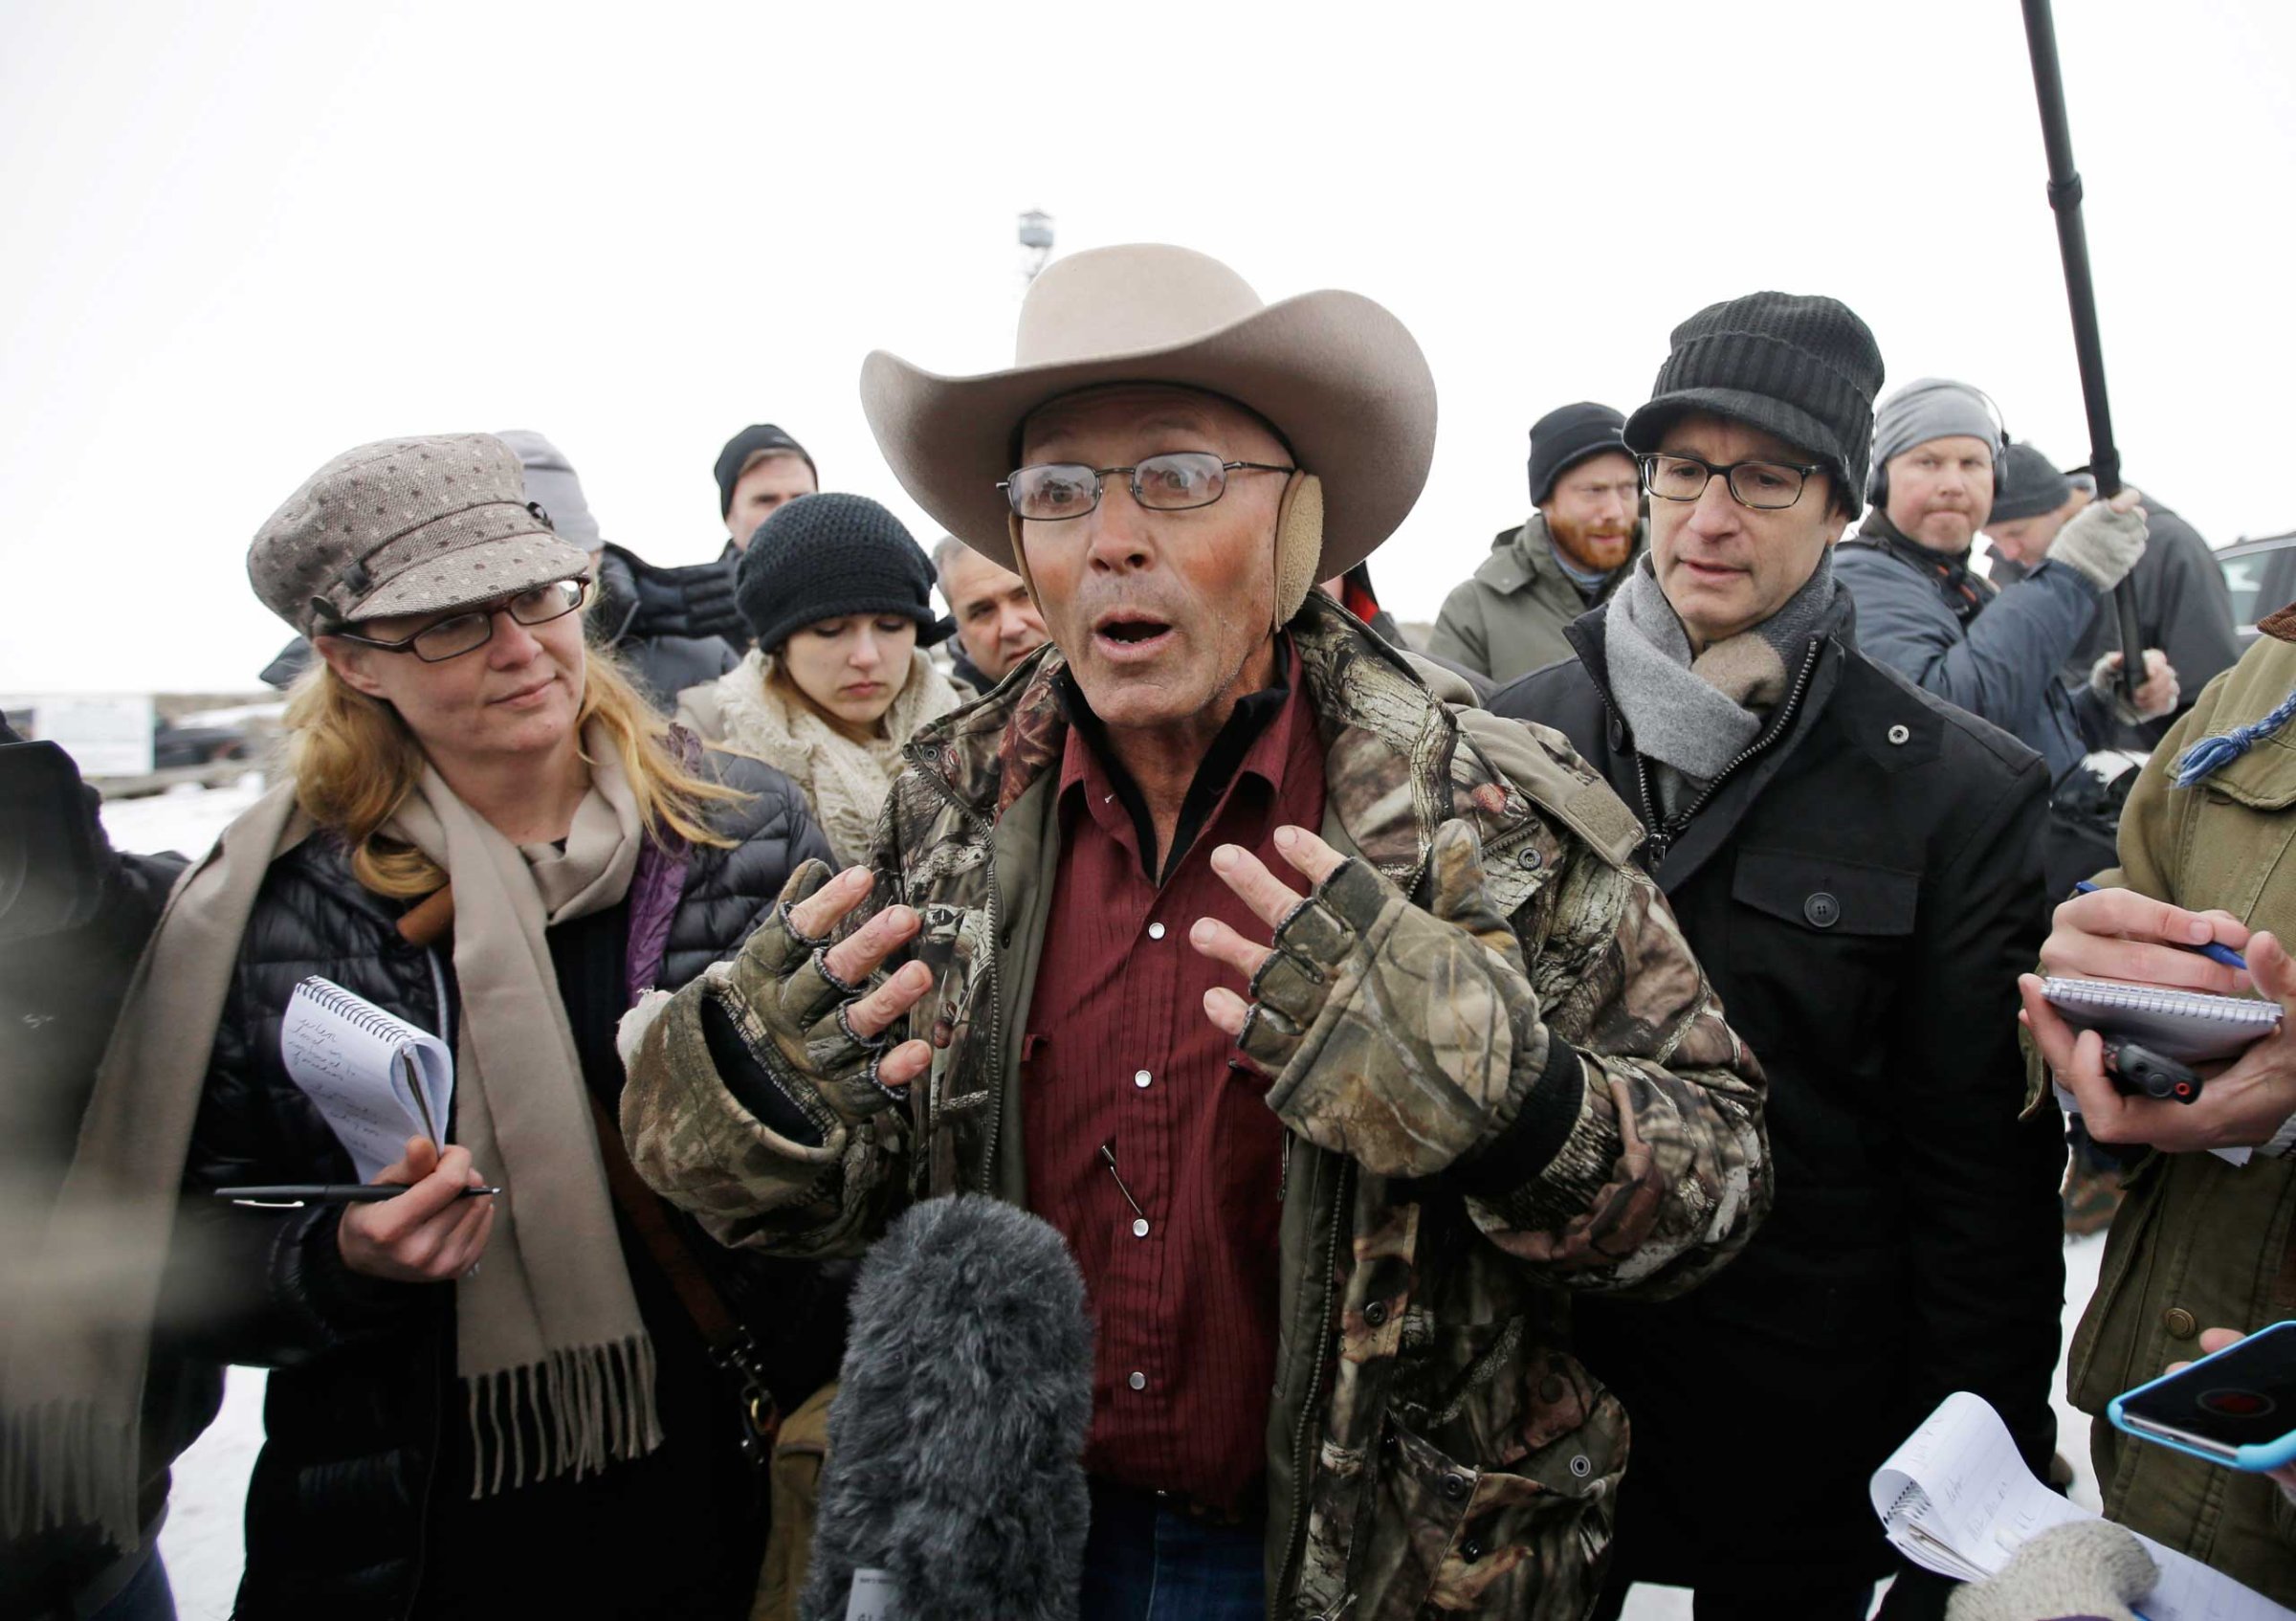 LaVoy Finicum, a rancher from Arizona who is part of the group occupying the Malheur National Wildlife Refuge, speaks during a news conference near Burns, Ore., on Jan. 5, 2016.